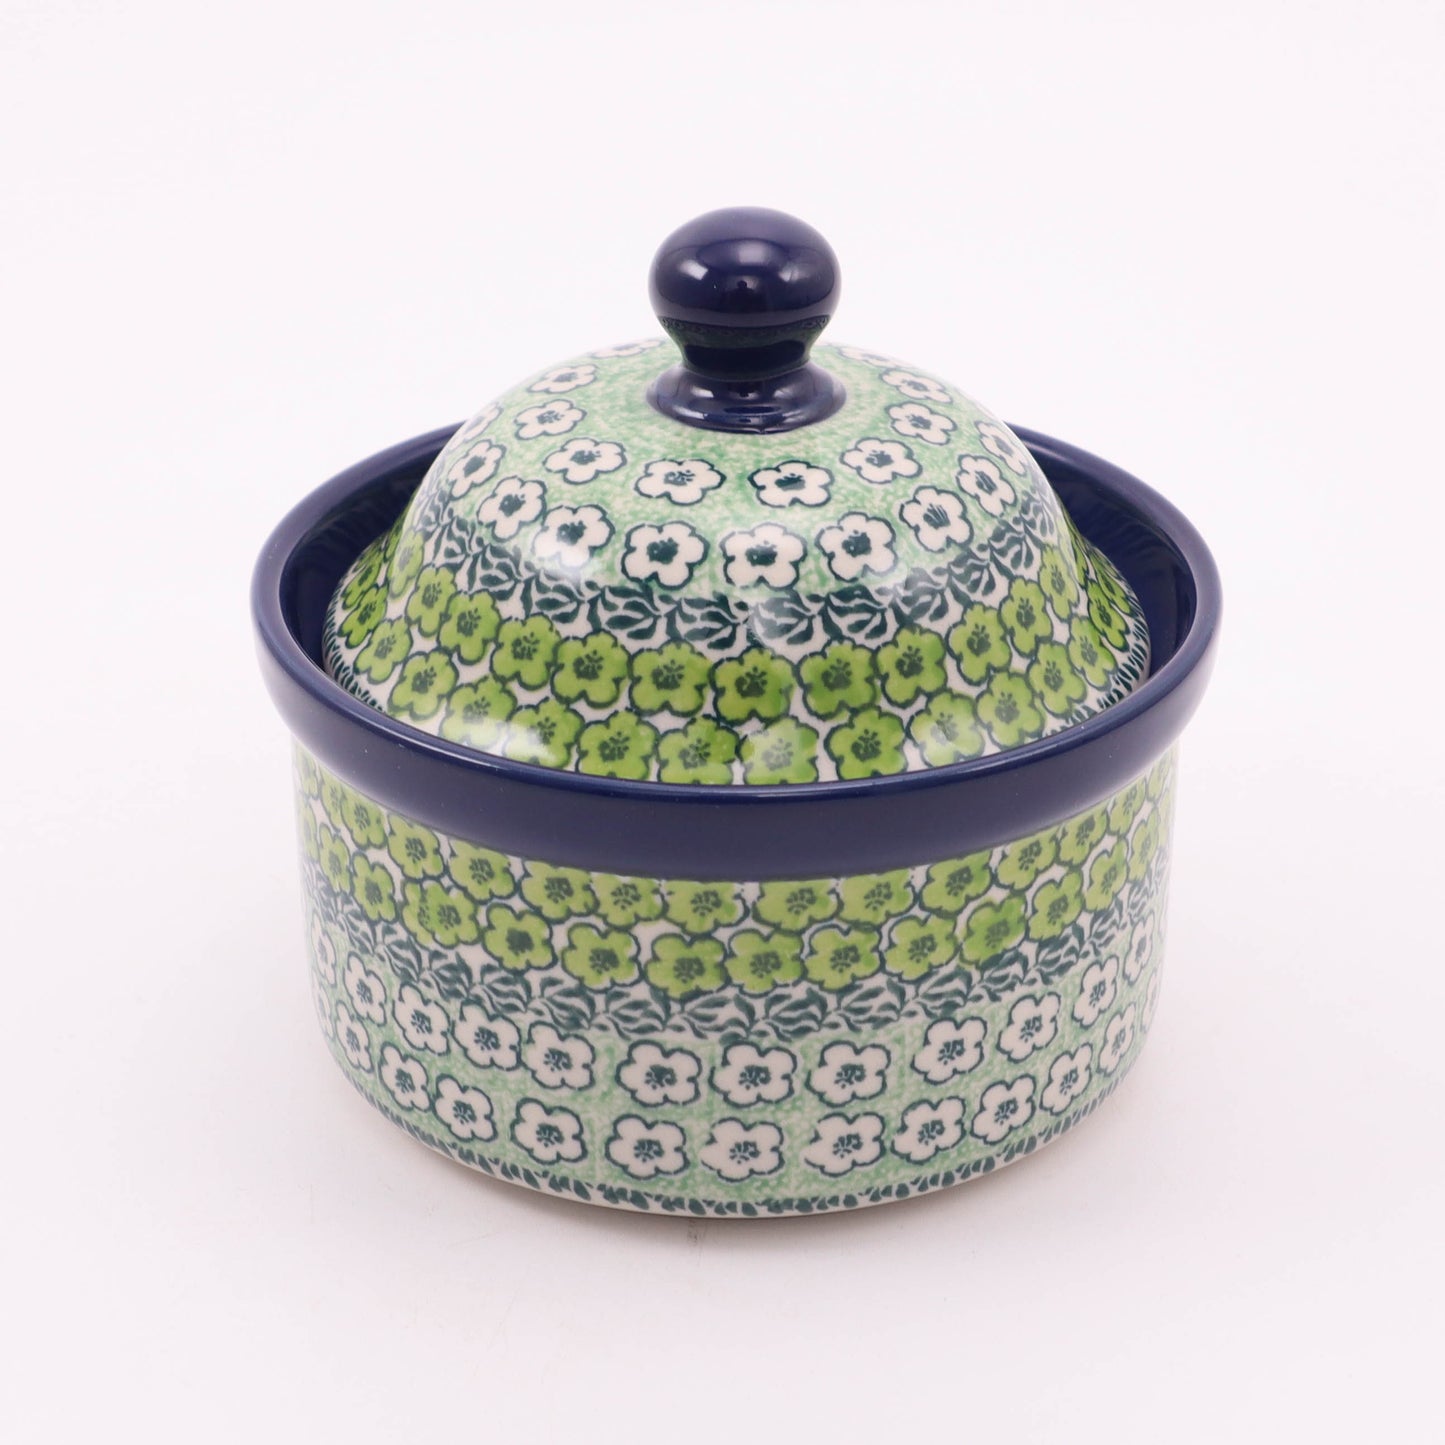 4"x5" Round Covered Dish. Pattern: Lucky Charms